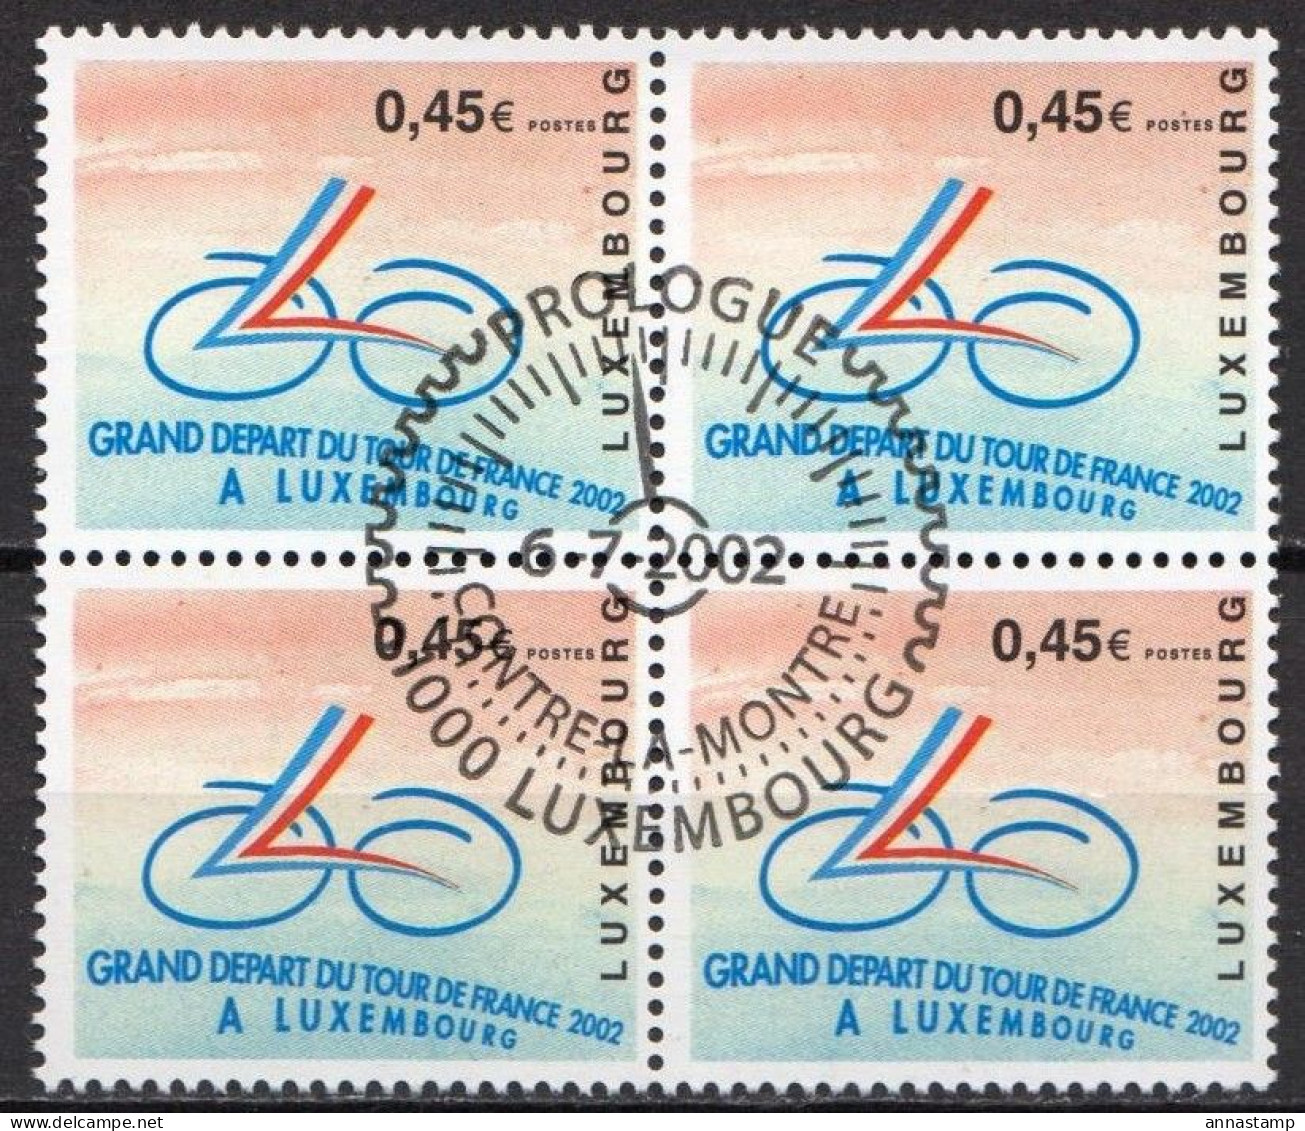 Luxembourg Stamp In A Block Of 4 With Special Cancel - Ciclismo